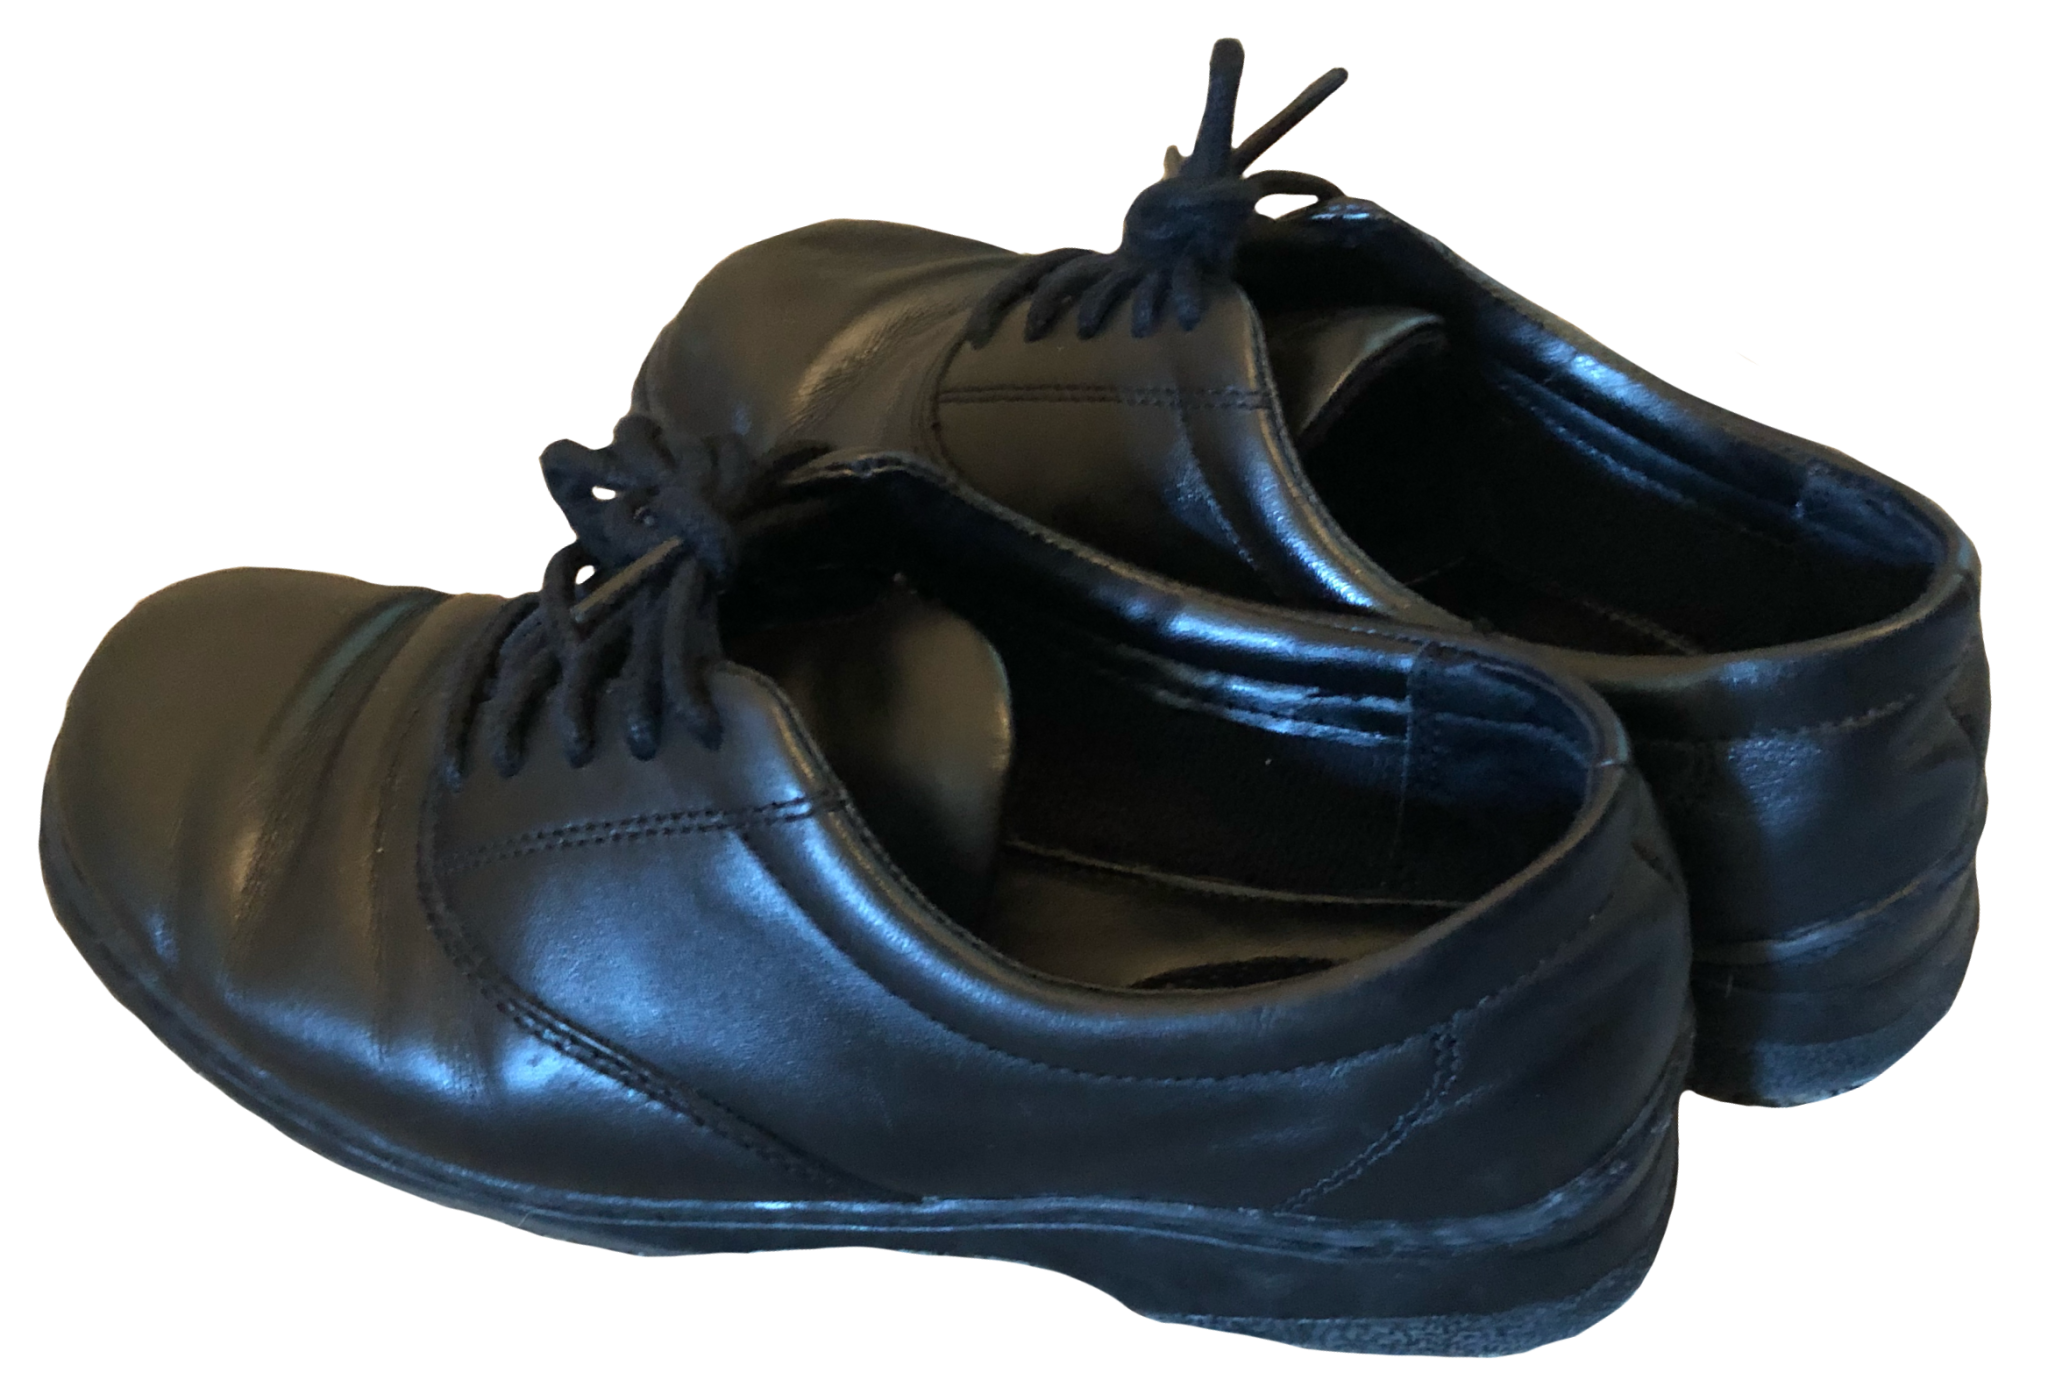 A pair of black oxford shoes from Dr Scholls